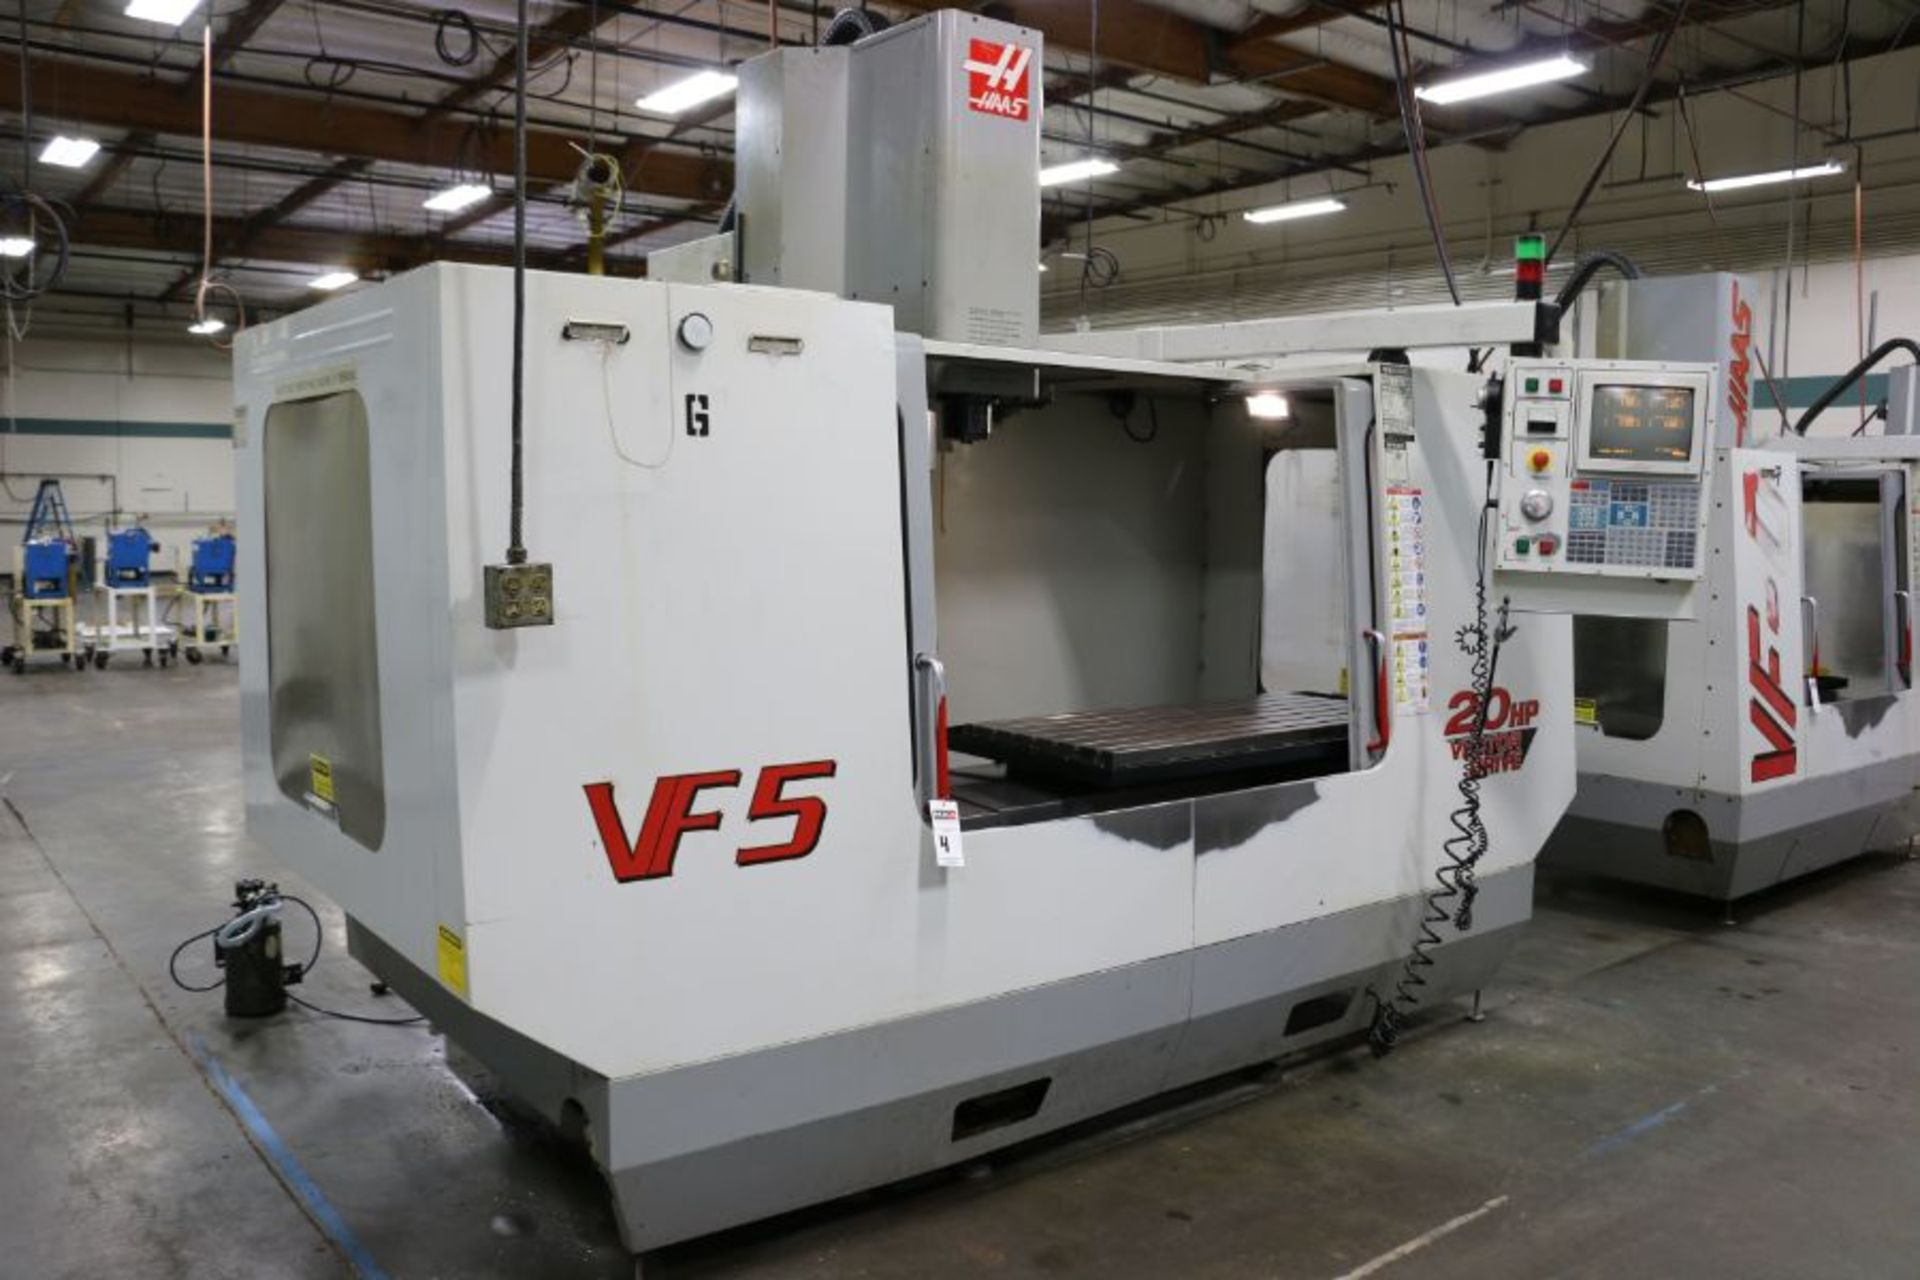 Haas VF-5, 50” x 26” x 25” Travels, 20 Position Tool Carousel, CT-40 Taper, s/n 19337, New 2000 - Image 5 of 13